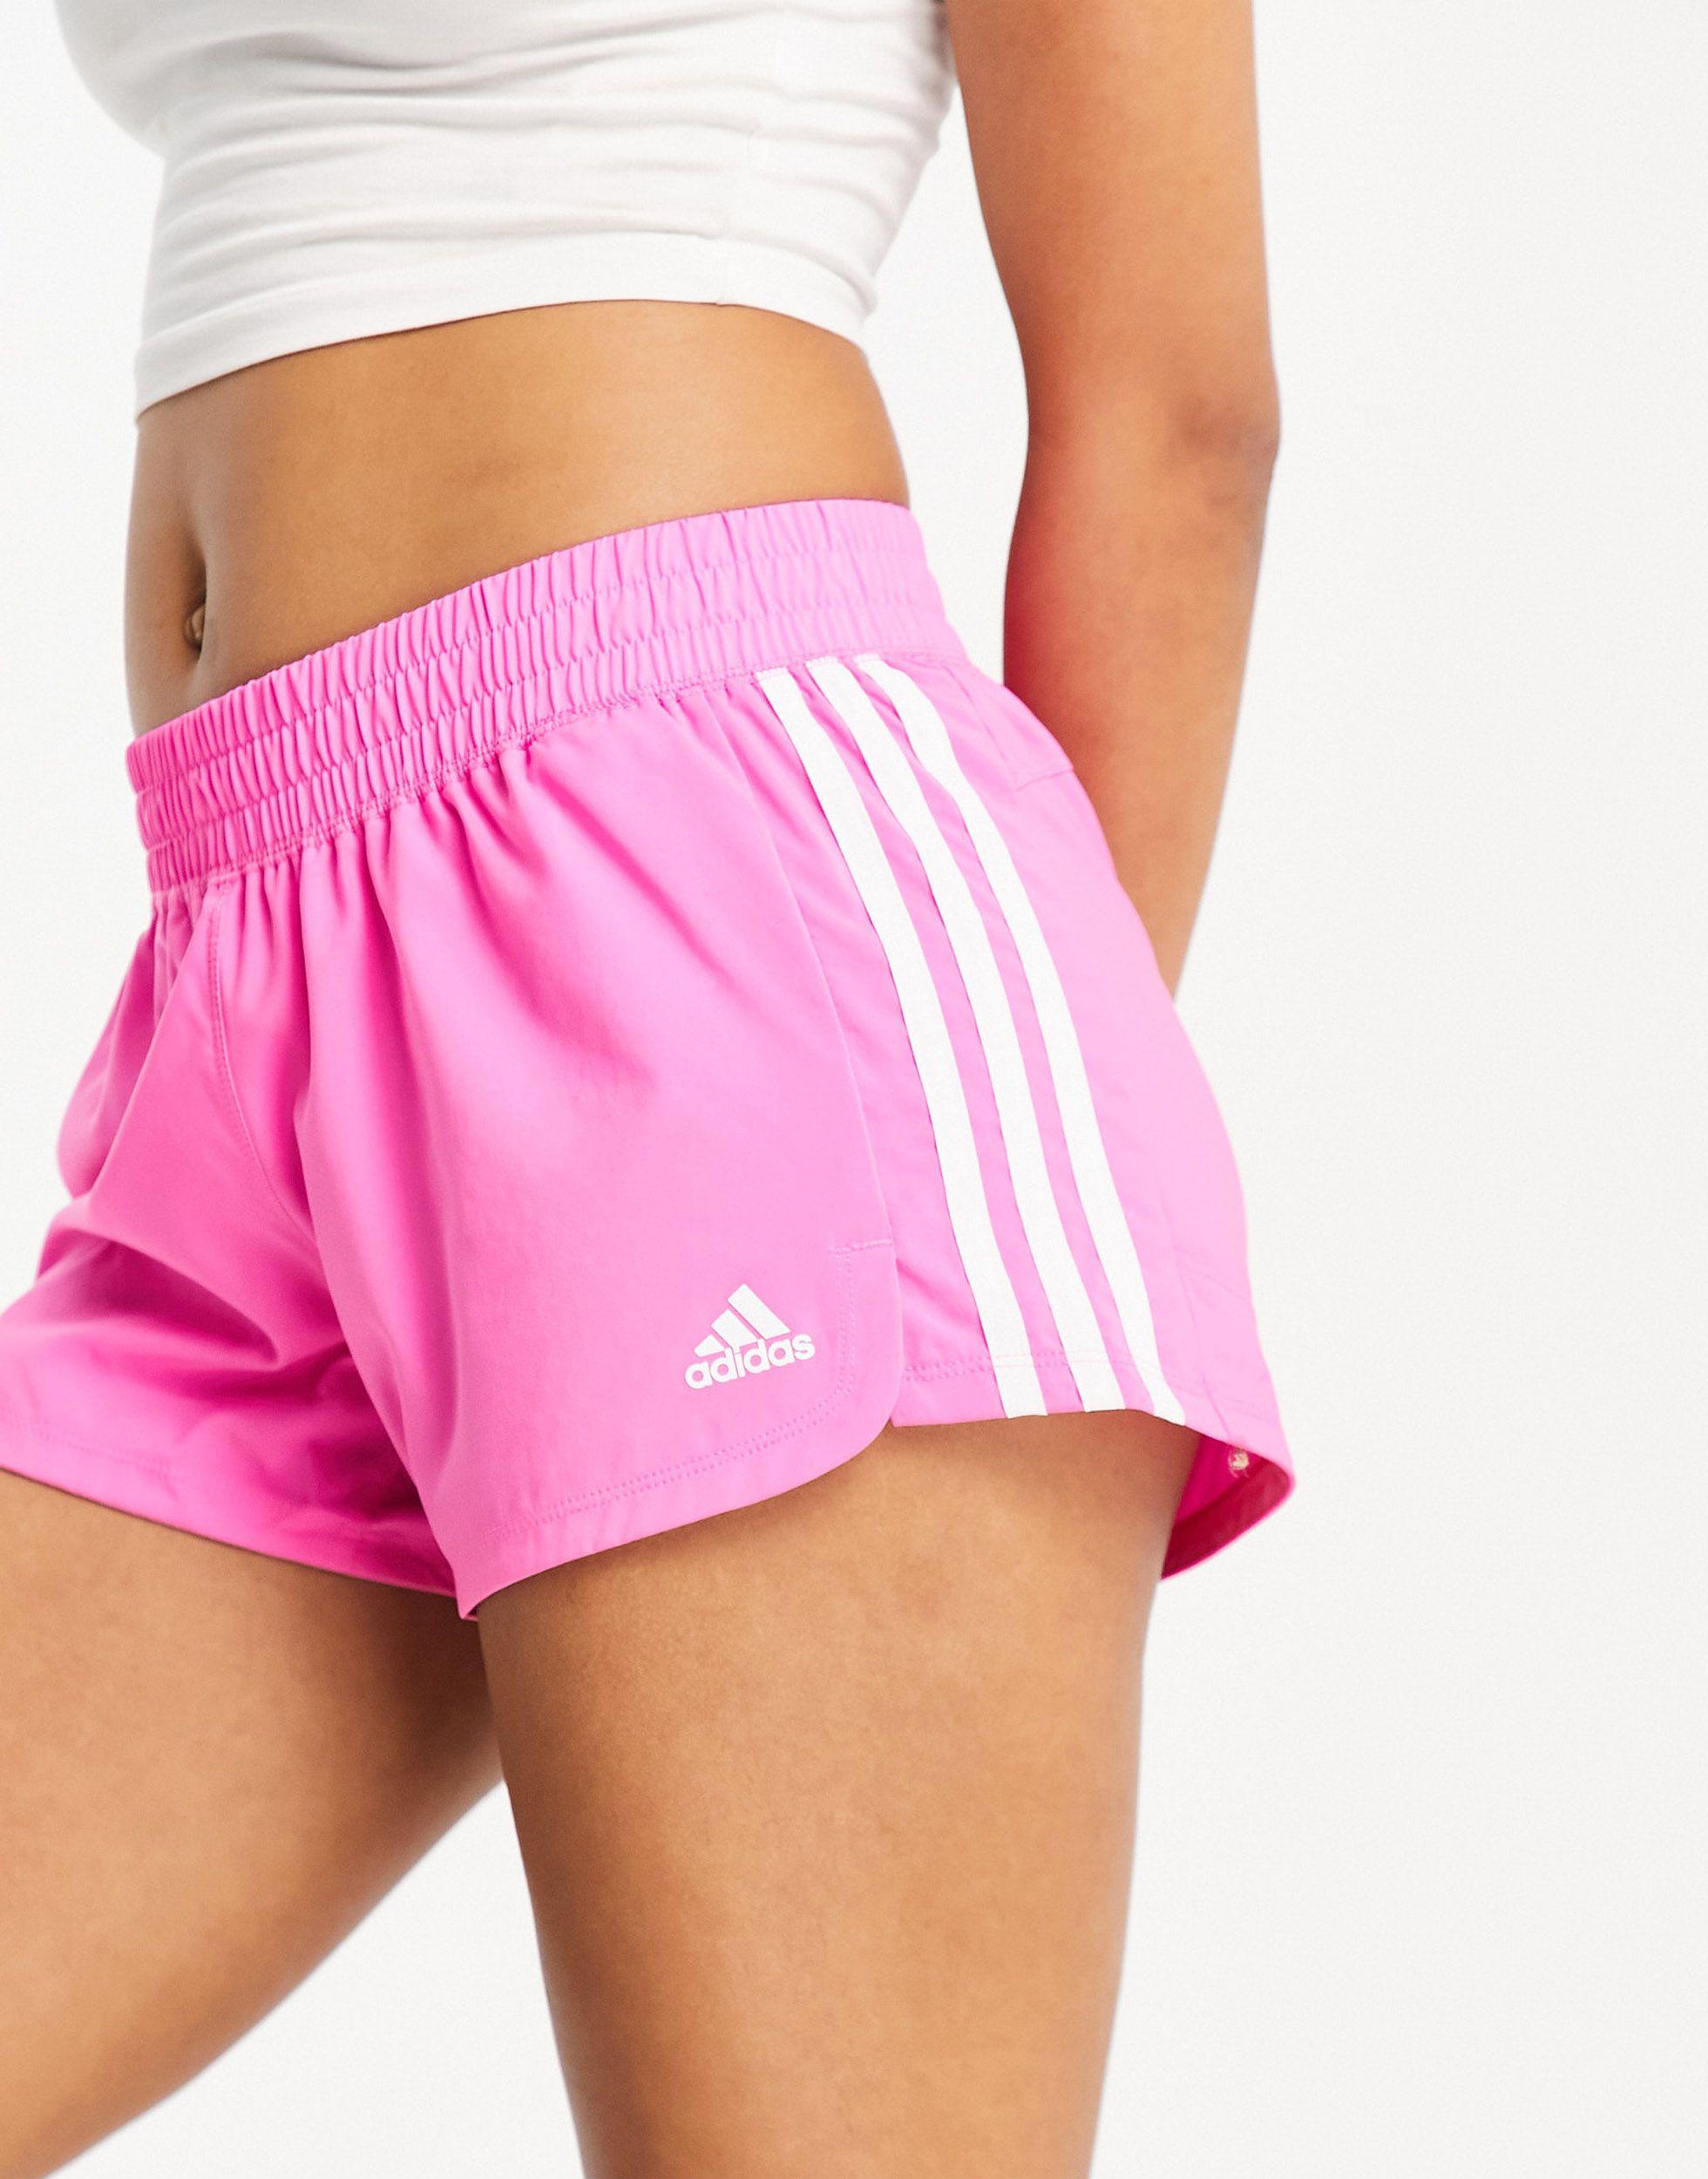 adidas Originals Adidas Training Pacer 3 Stripe Woven Shorts in | Lyst